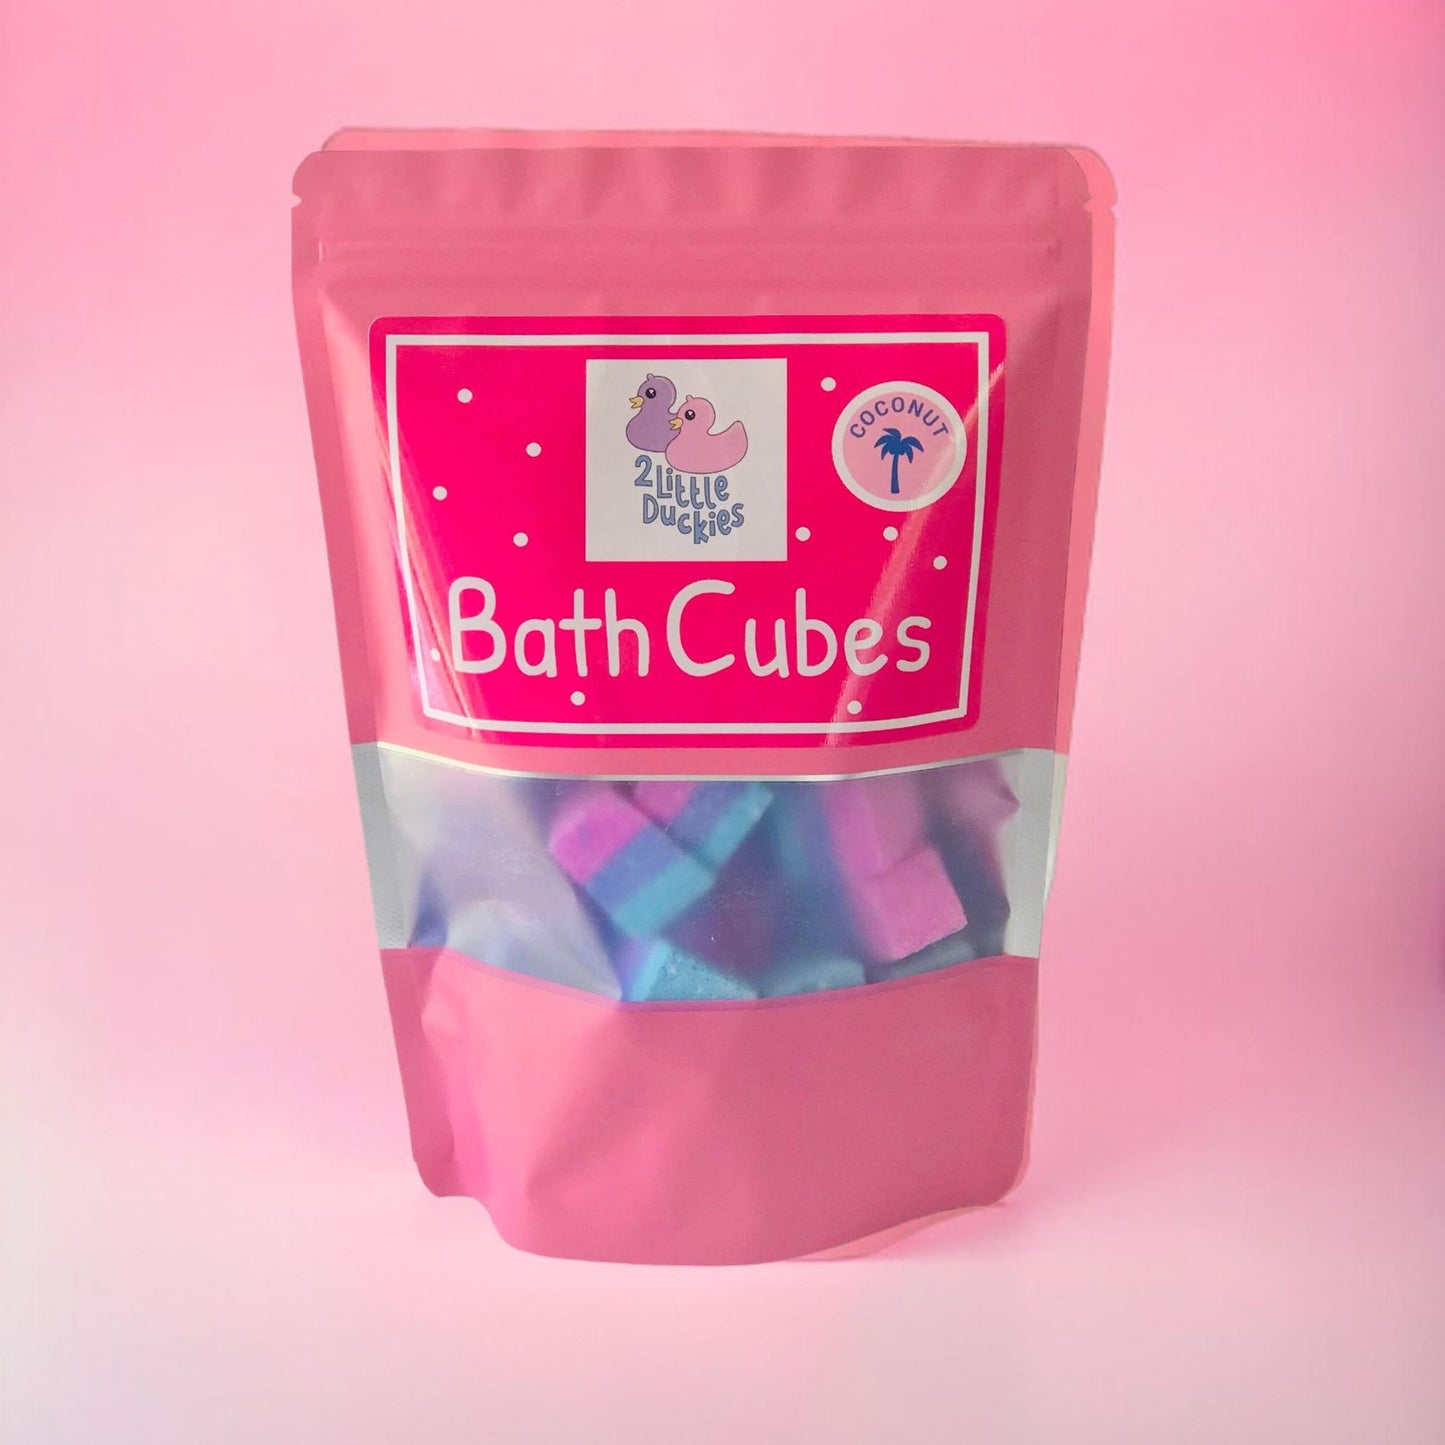 Coconut Fizzy Bath Cubes (Branded or White Label Option) 250g